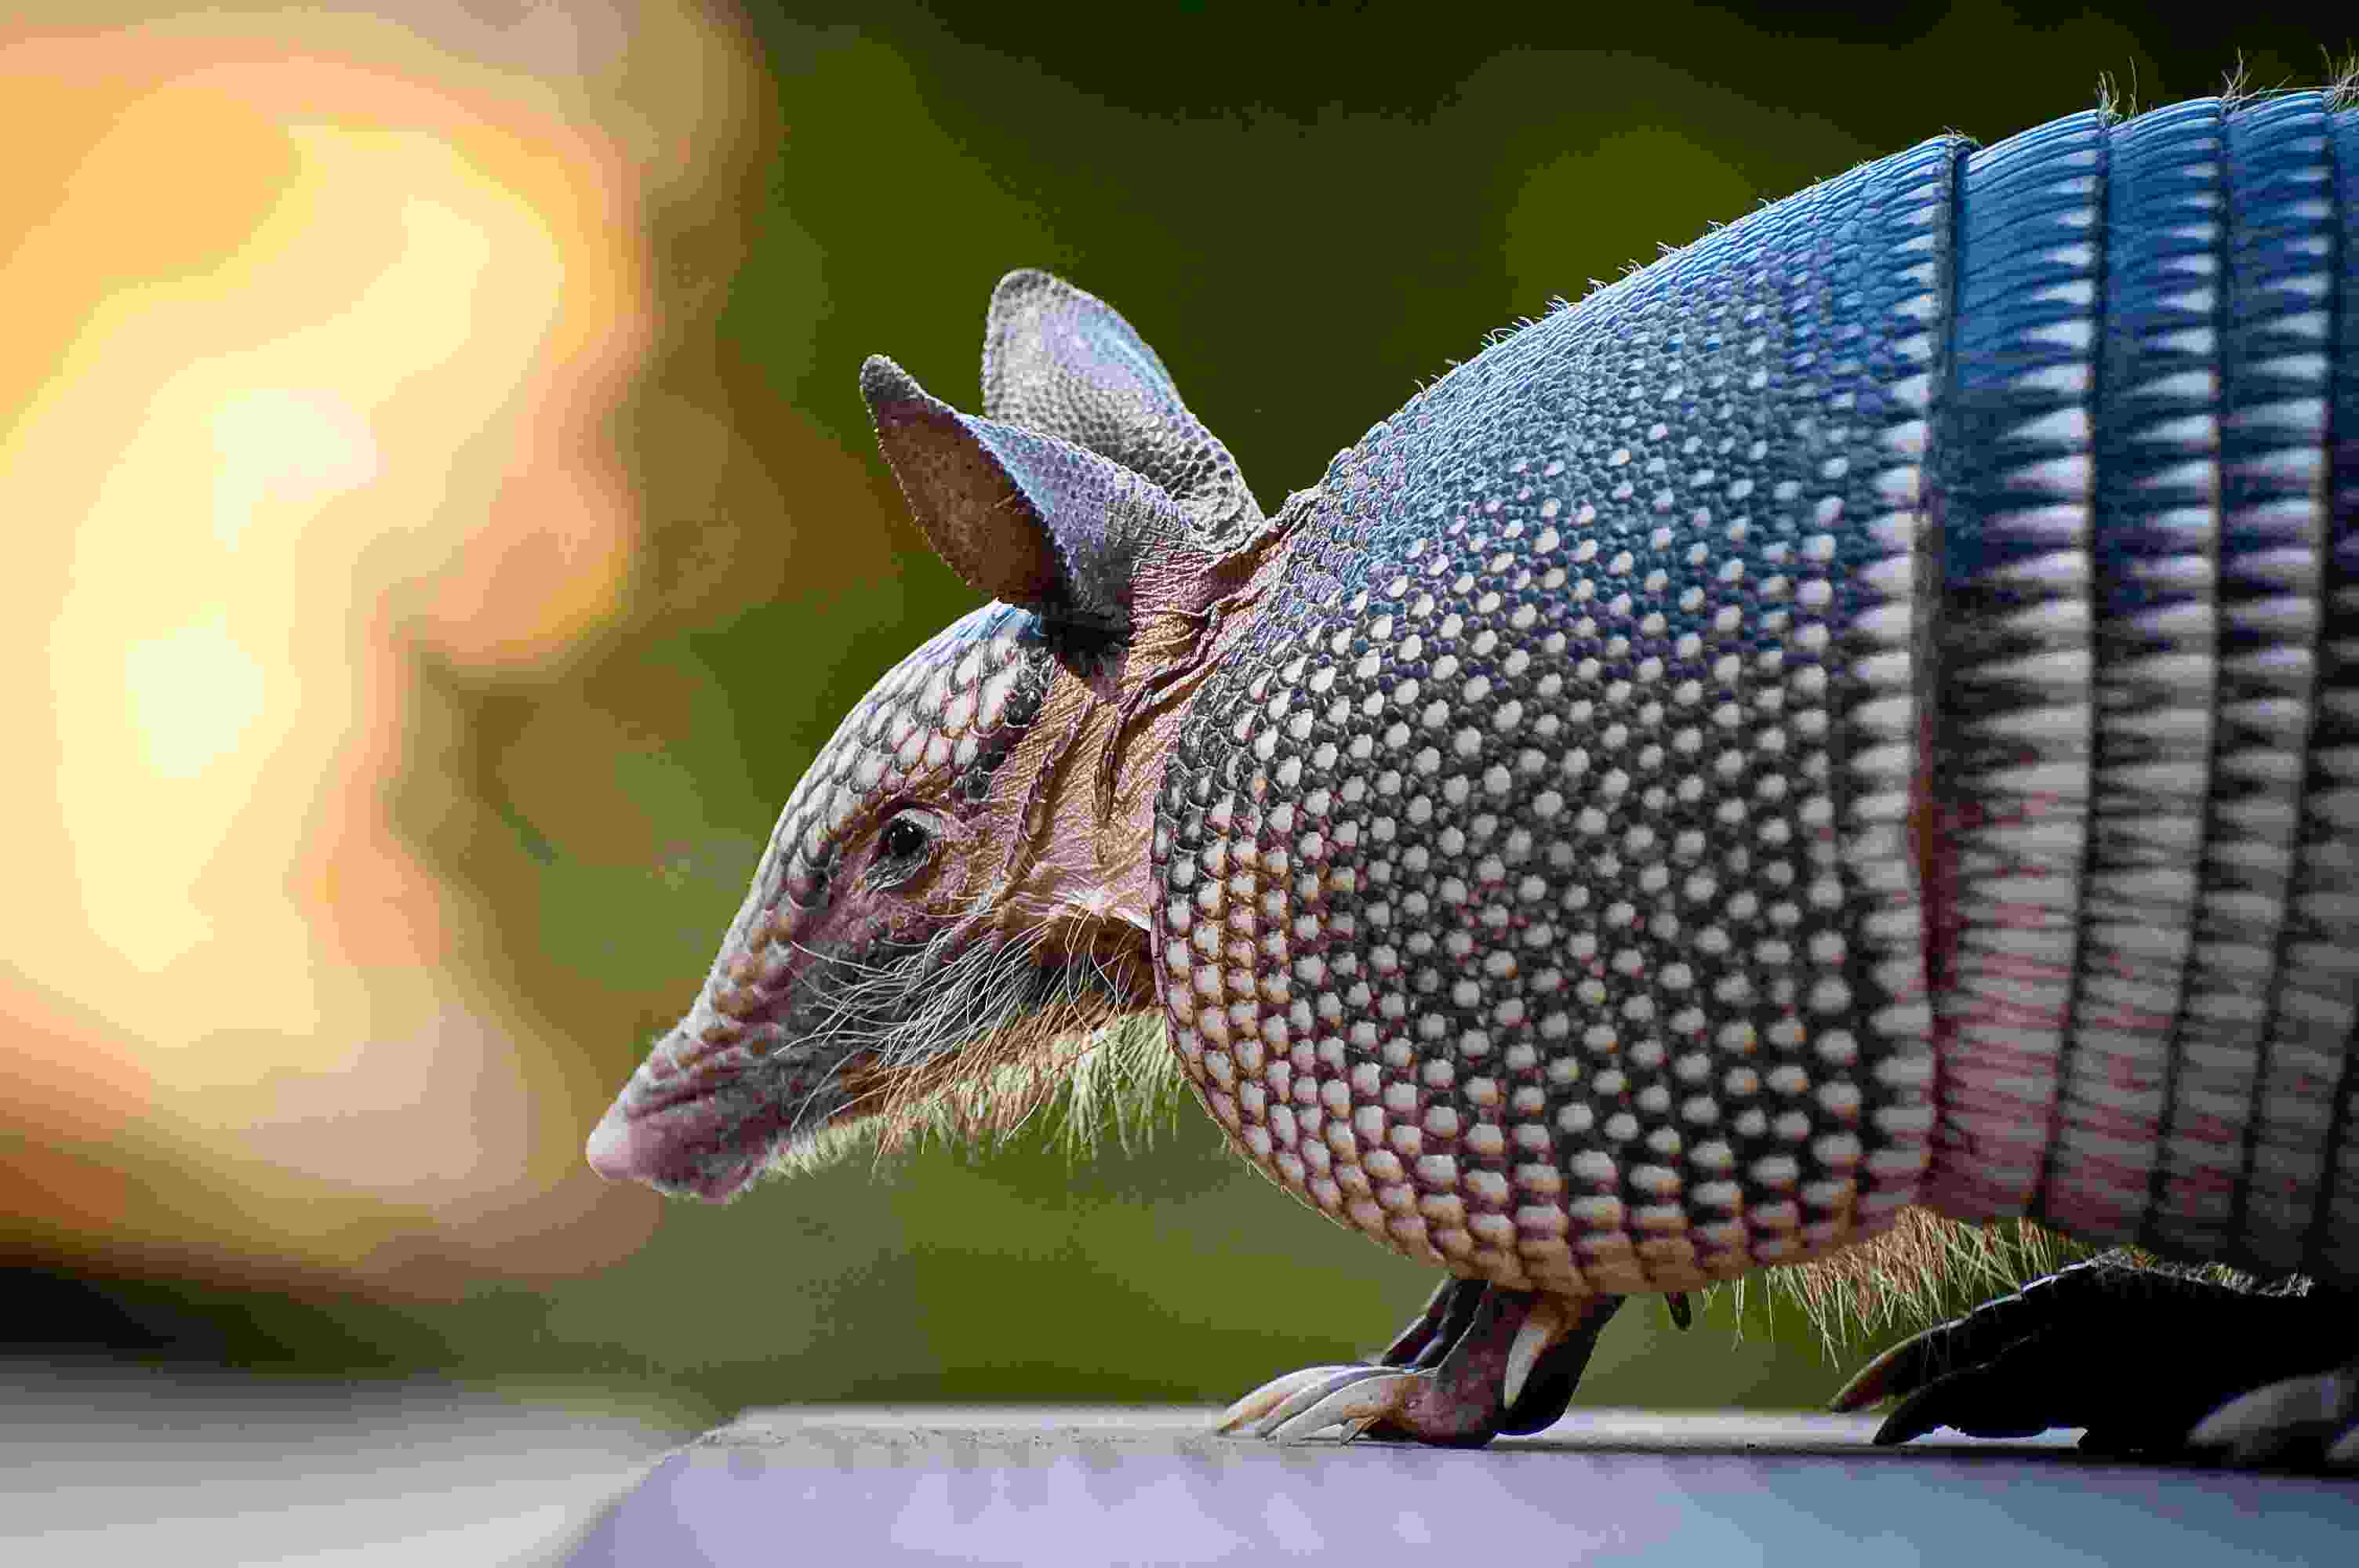 How to Get Rid of an Armadillo, Control